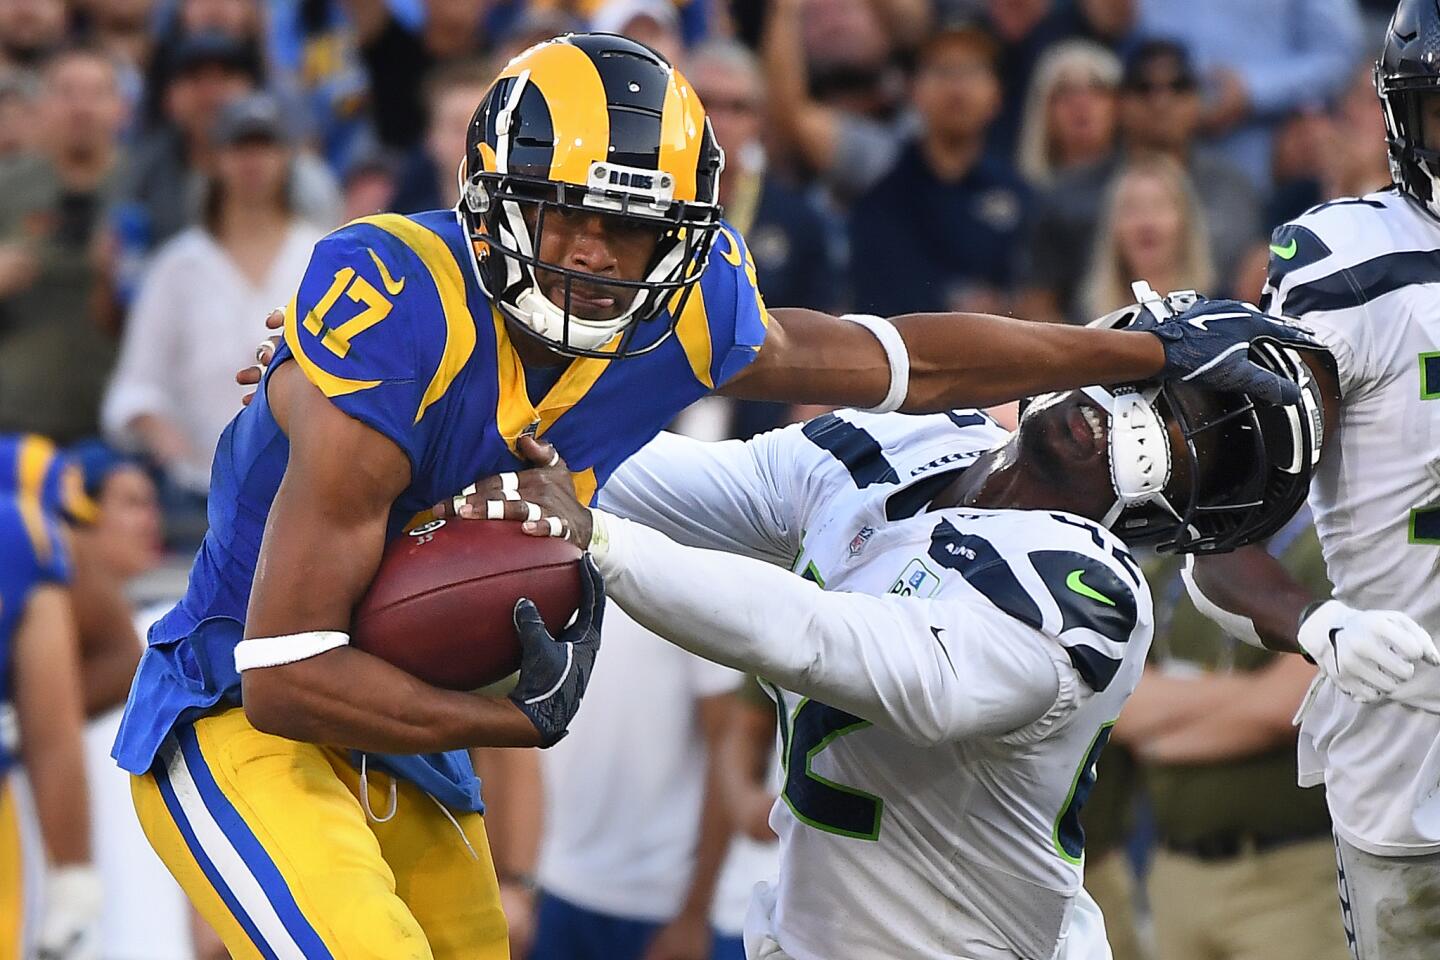 Rams receiver Robert Woods stiff-arms Seattle Seahawks safety Delano Hill to pick up yards in the third quarter at the Coliseum on Sunday.